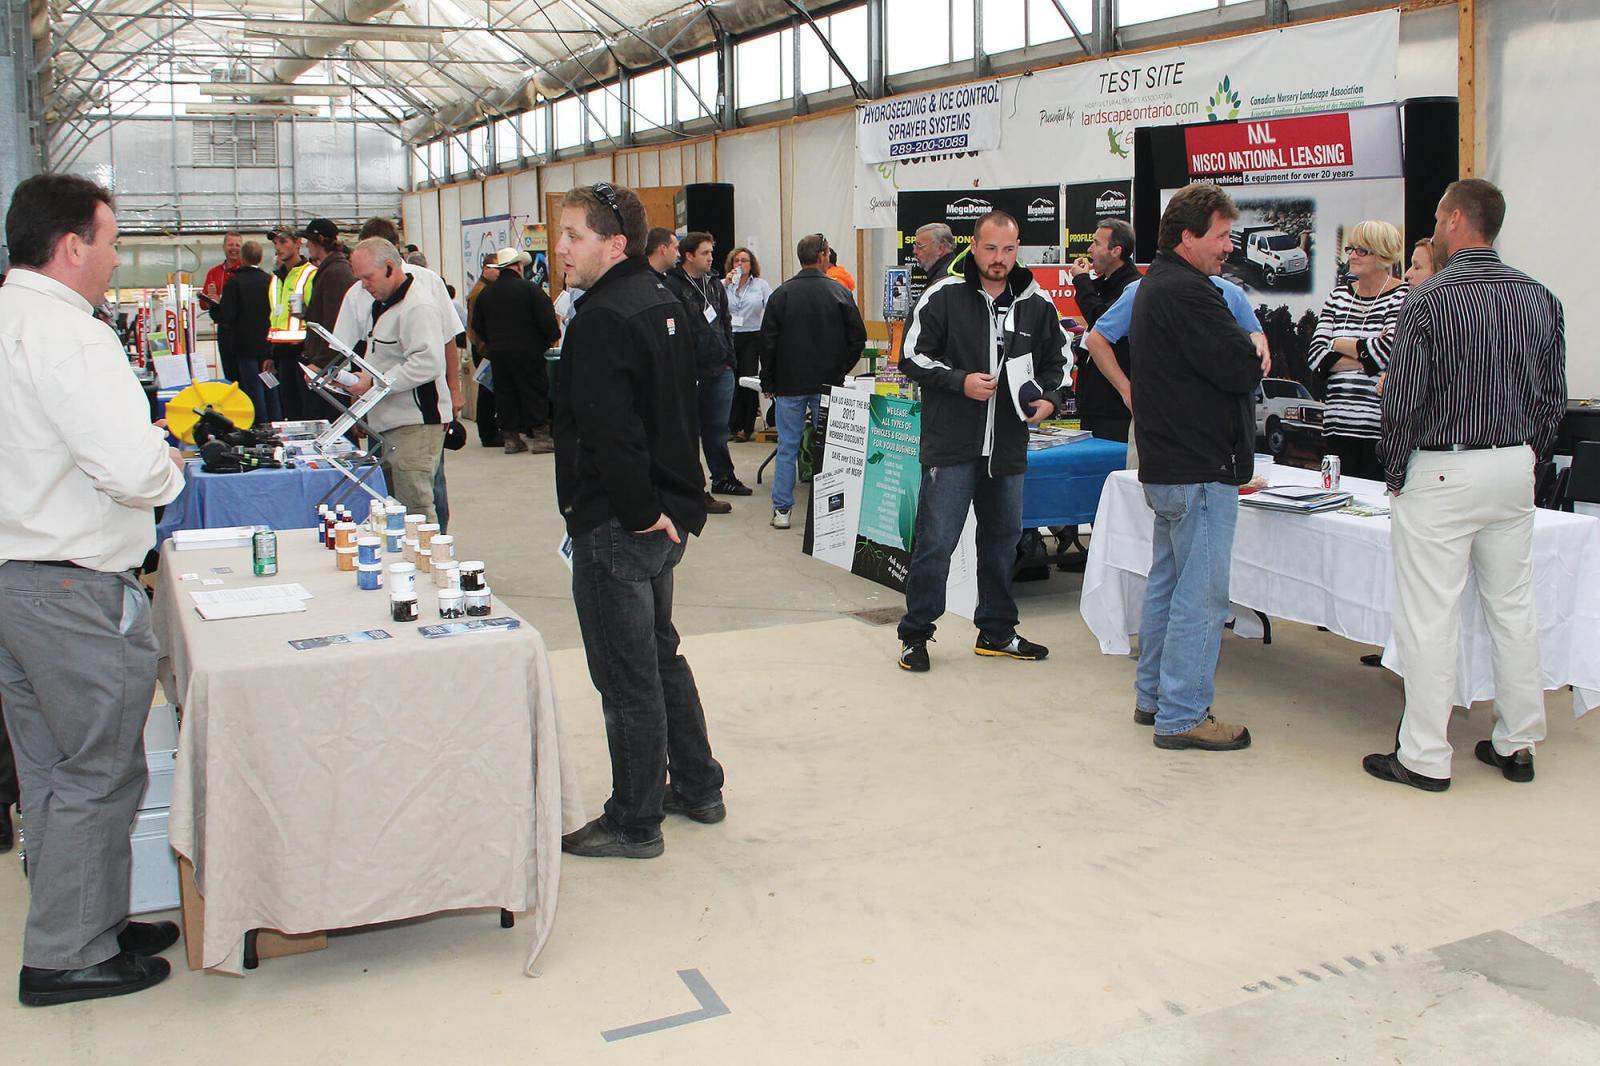 Last year the Snowposium's trade show had a positive turnout for both exhibitors and show attendees.